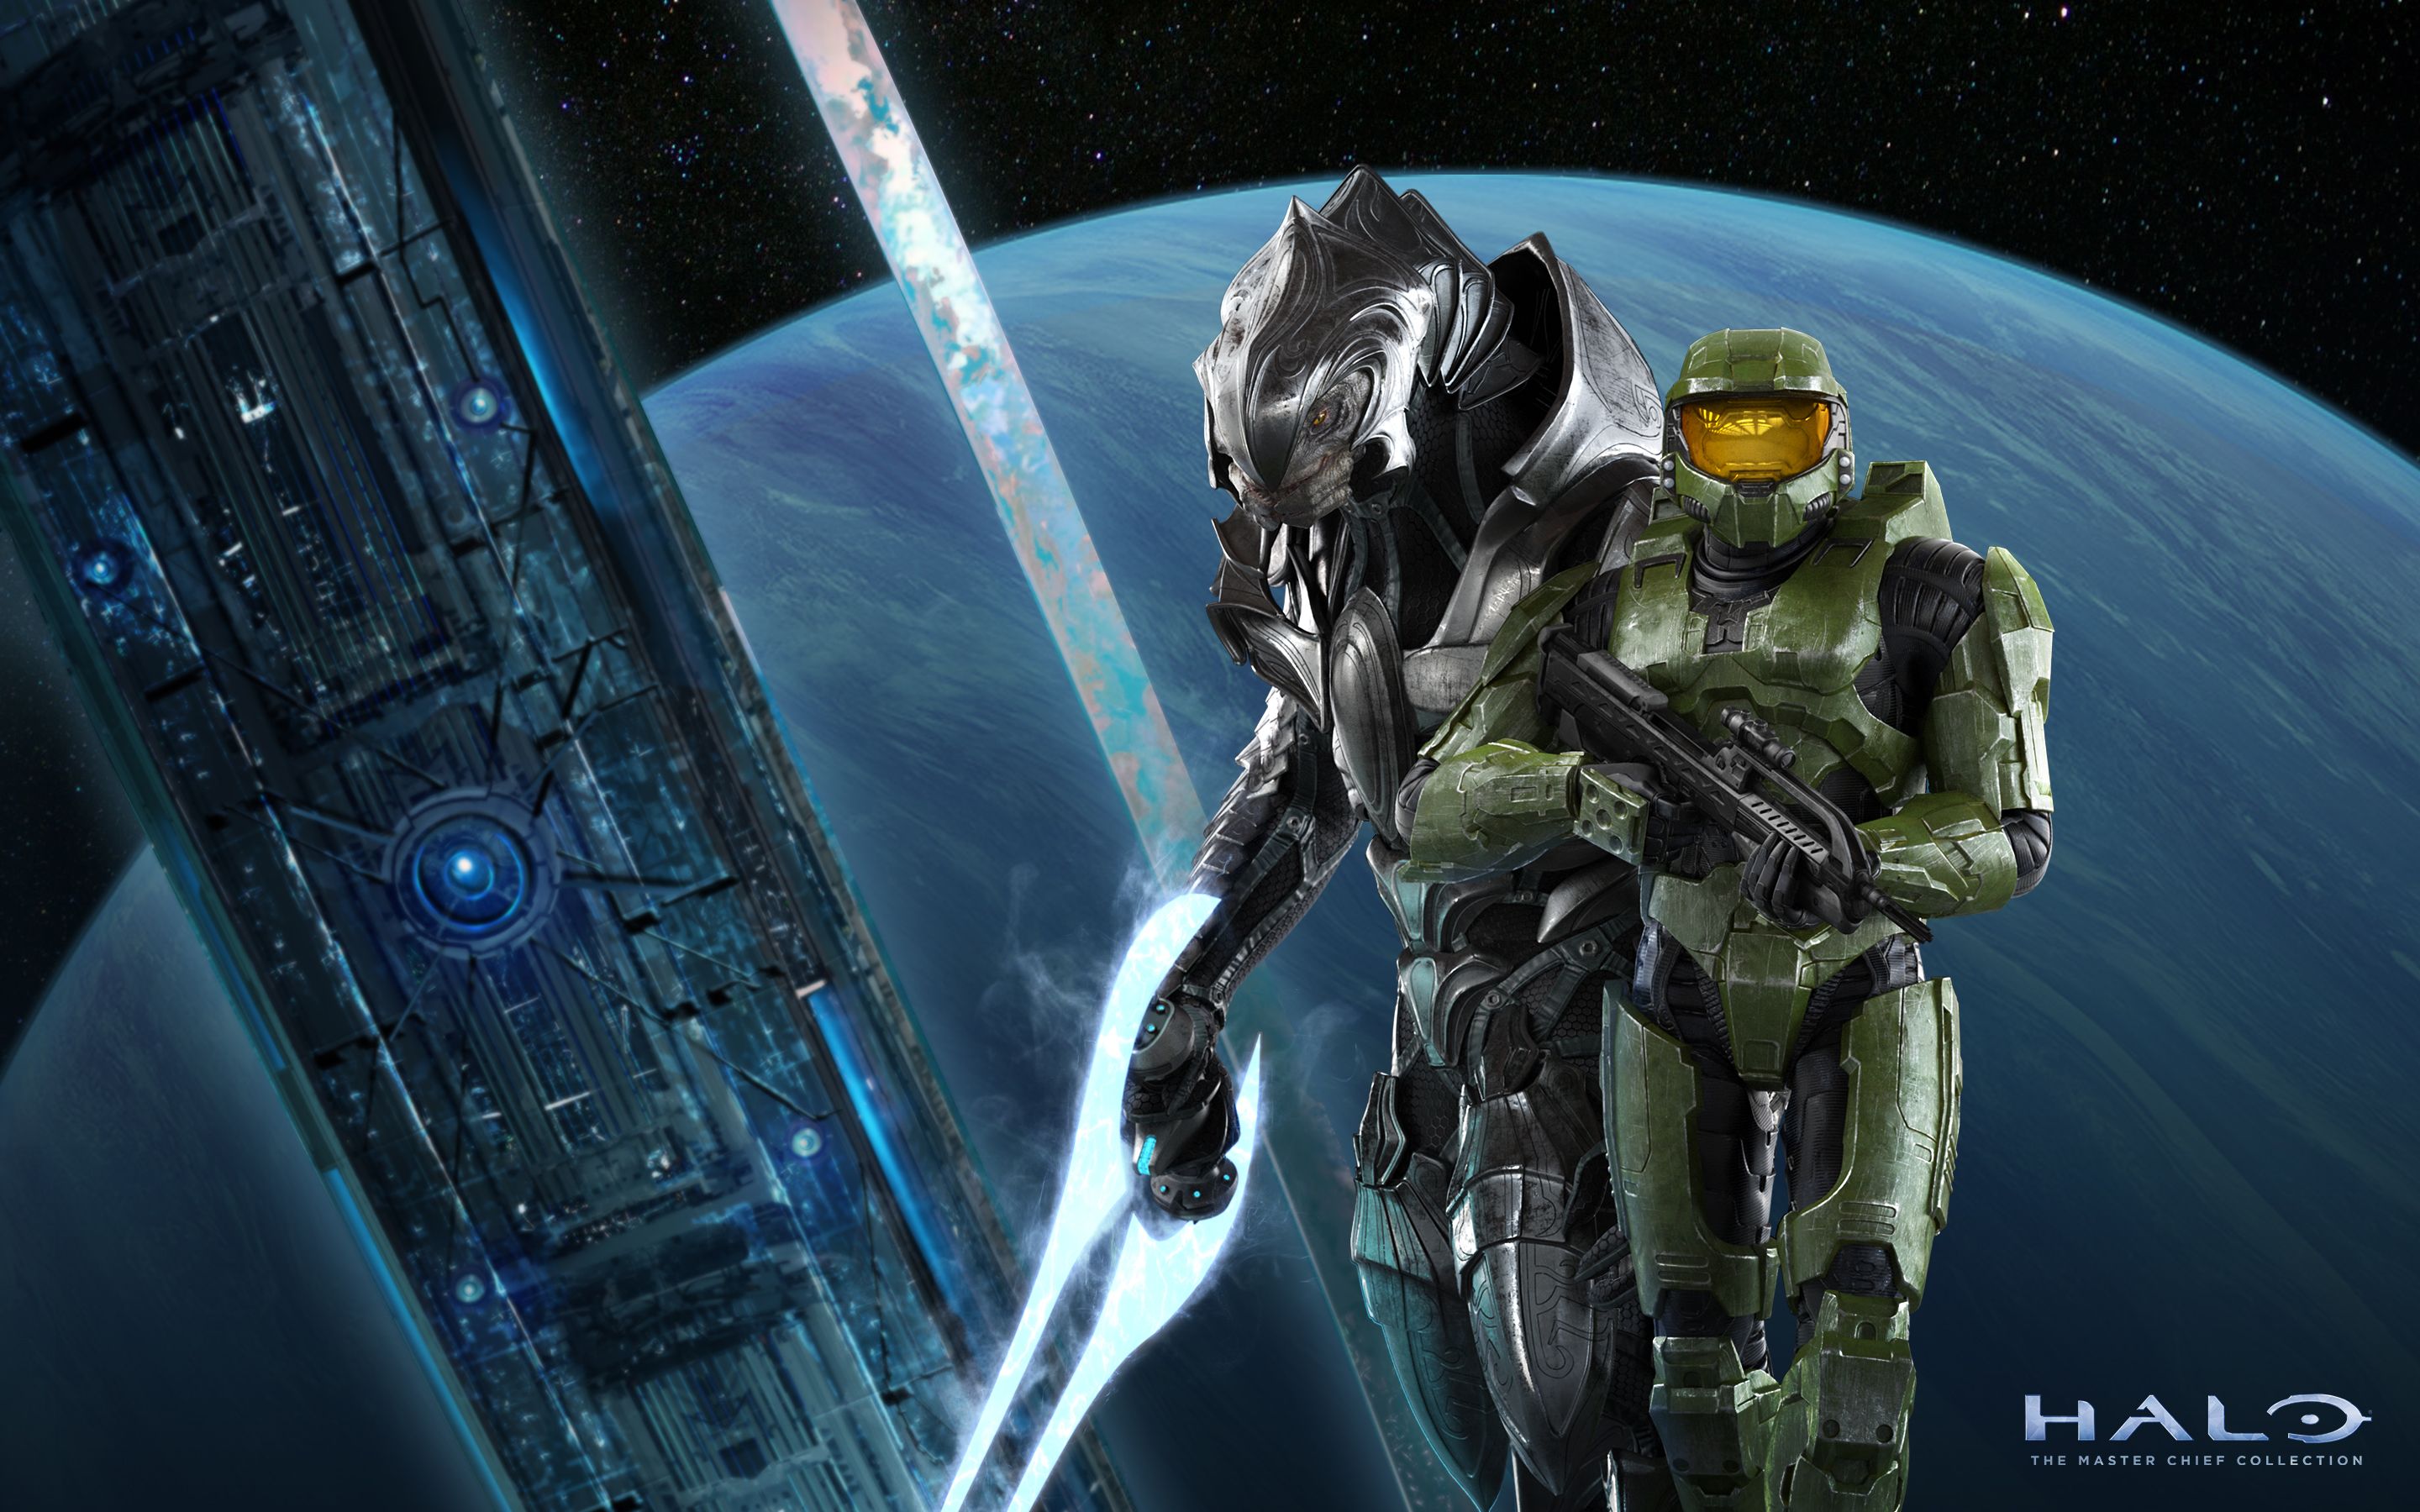 Halo 2 Anniversary Mobile and screen wallpapers | HaloFanForLife